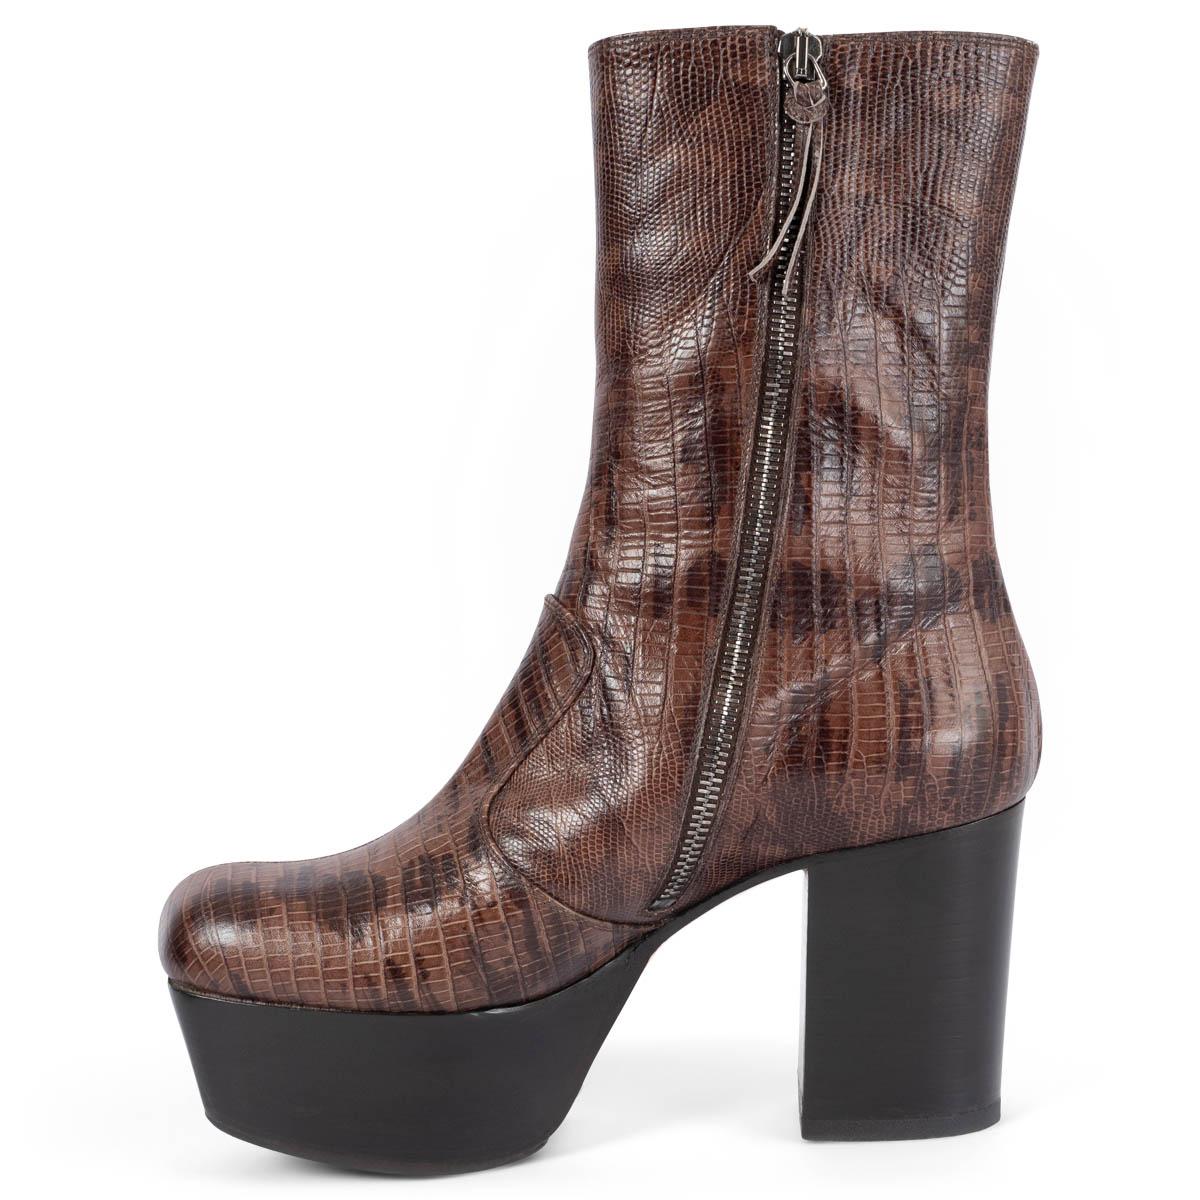 MIU MIU brown leather FAUX LIZARD Platform Boots Shoes 36 In Excellent Condition For Sale In Zürich, CH